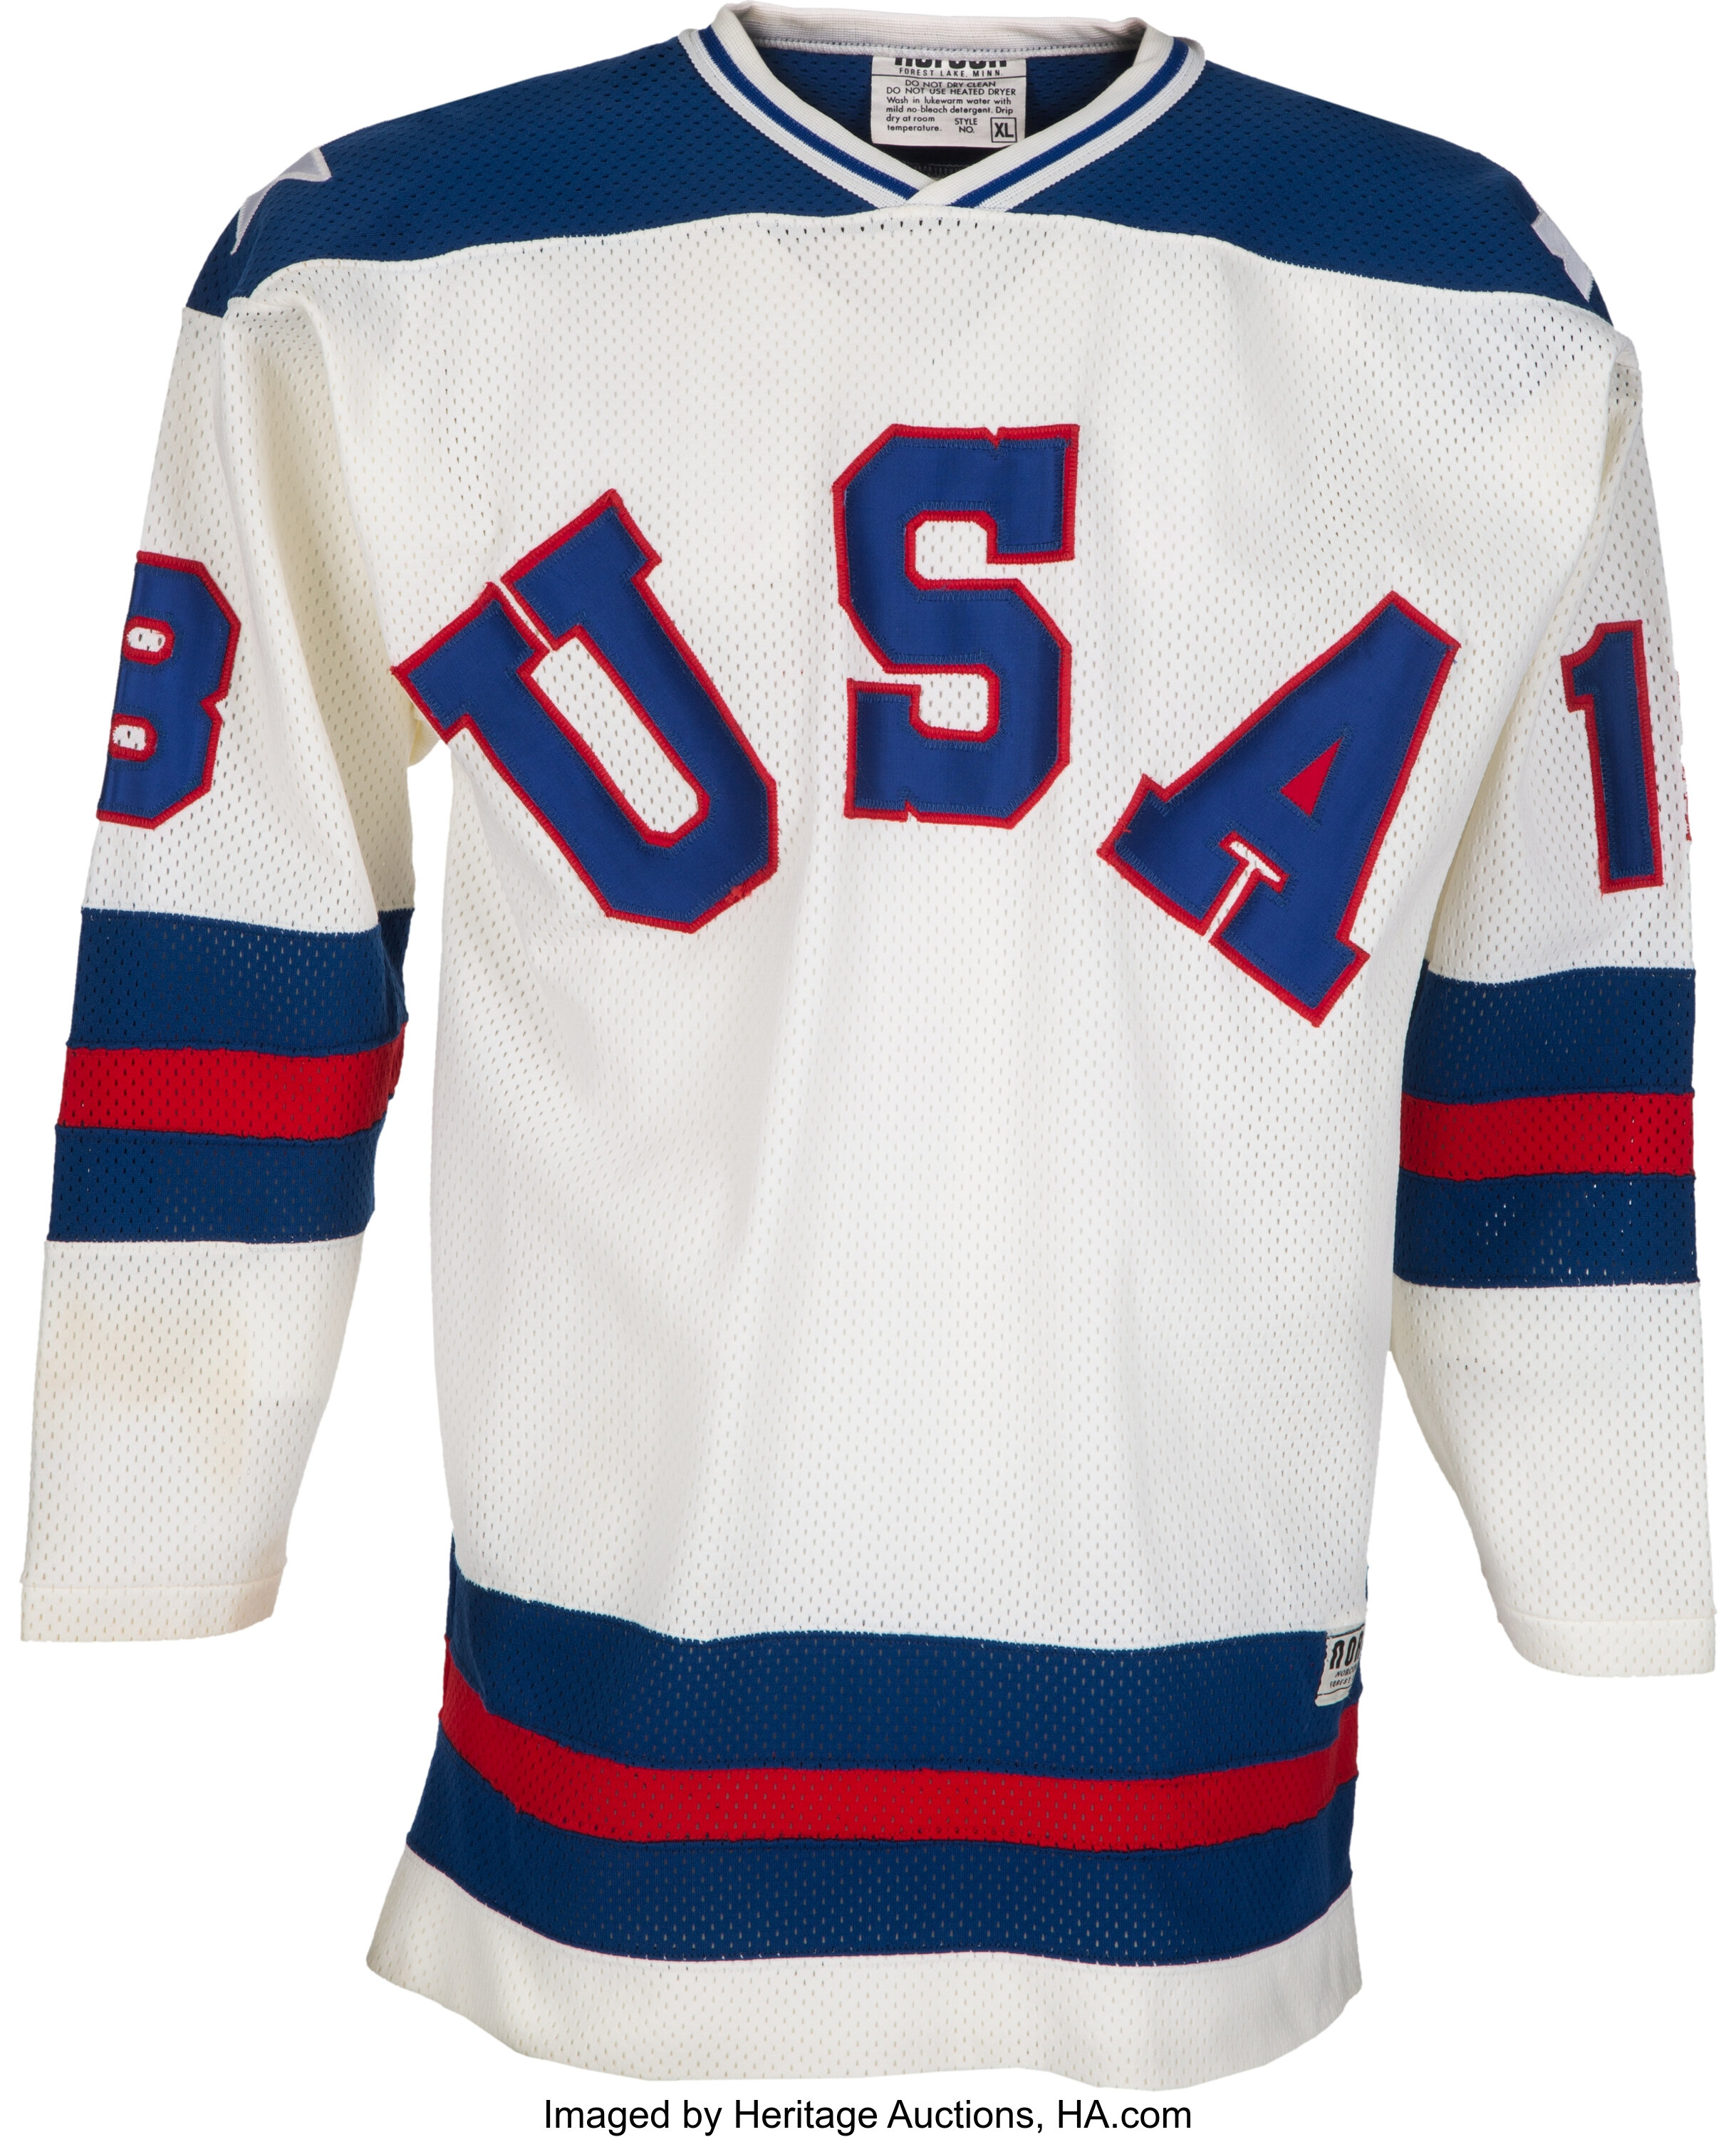 USA Hockey Adult Miracle on Ice 1980 USA Hockey Team Jersey Top - Blue, Men's, Size: Large